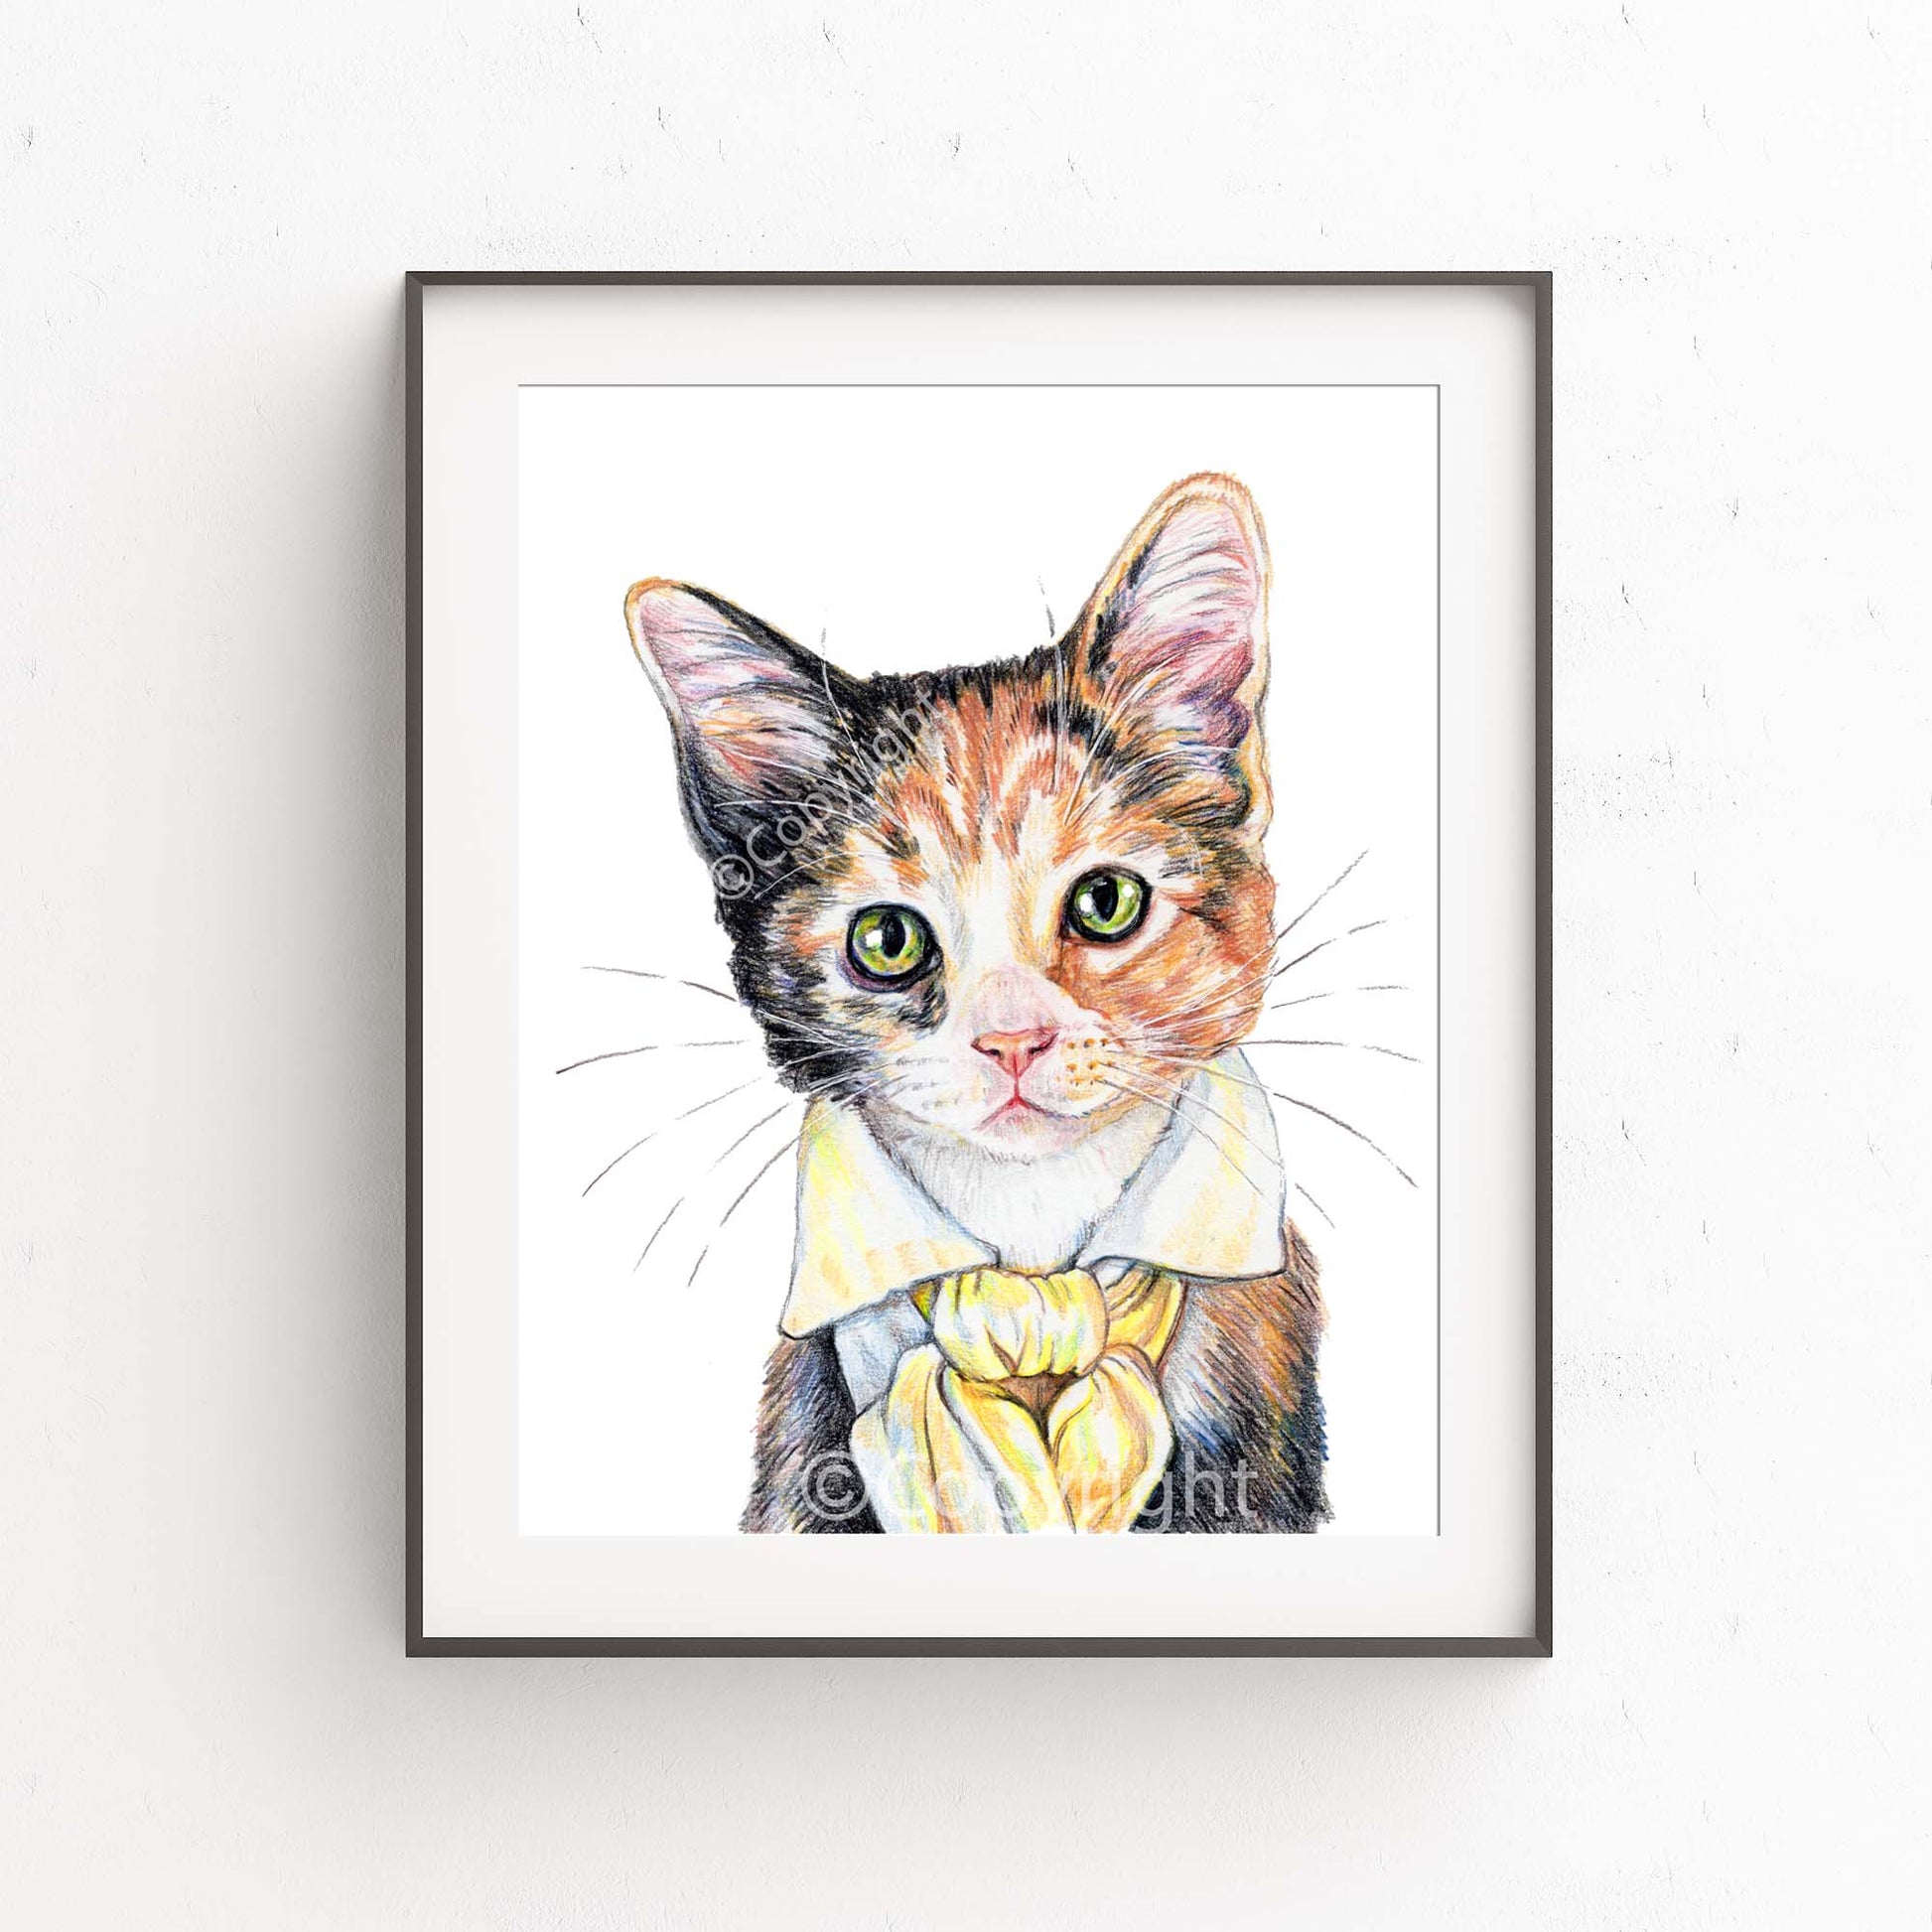 Coloured Pencil drawing of a calico kitten cat wearing a Romantic-style cravat. Art by Deidre Wicks